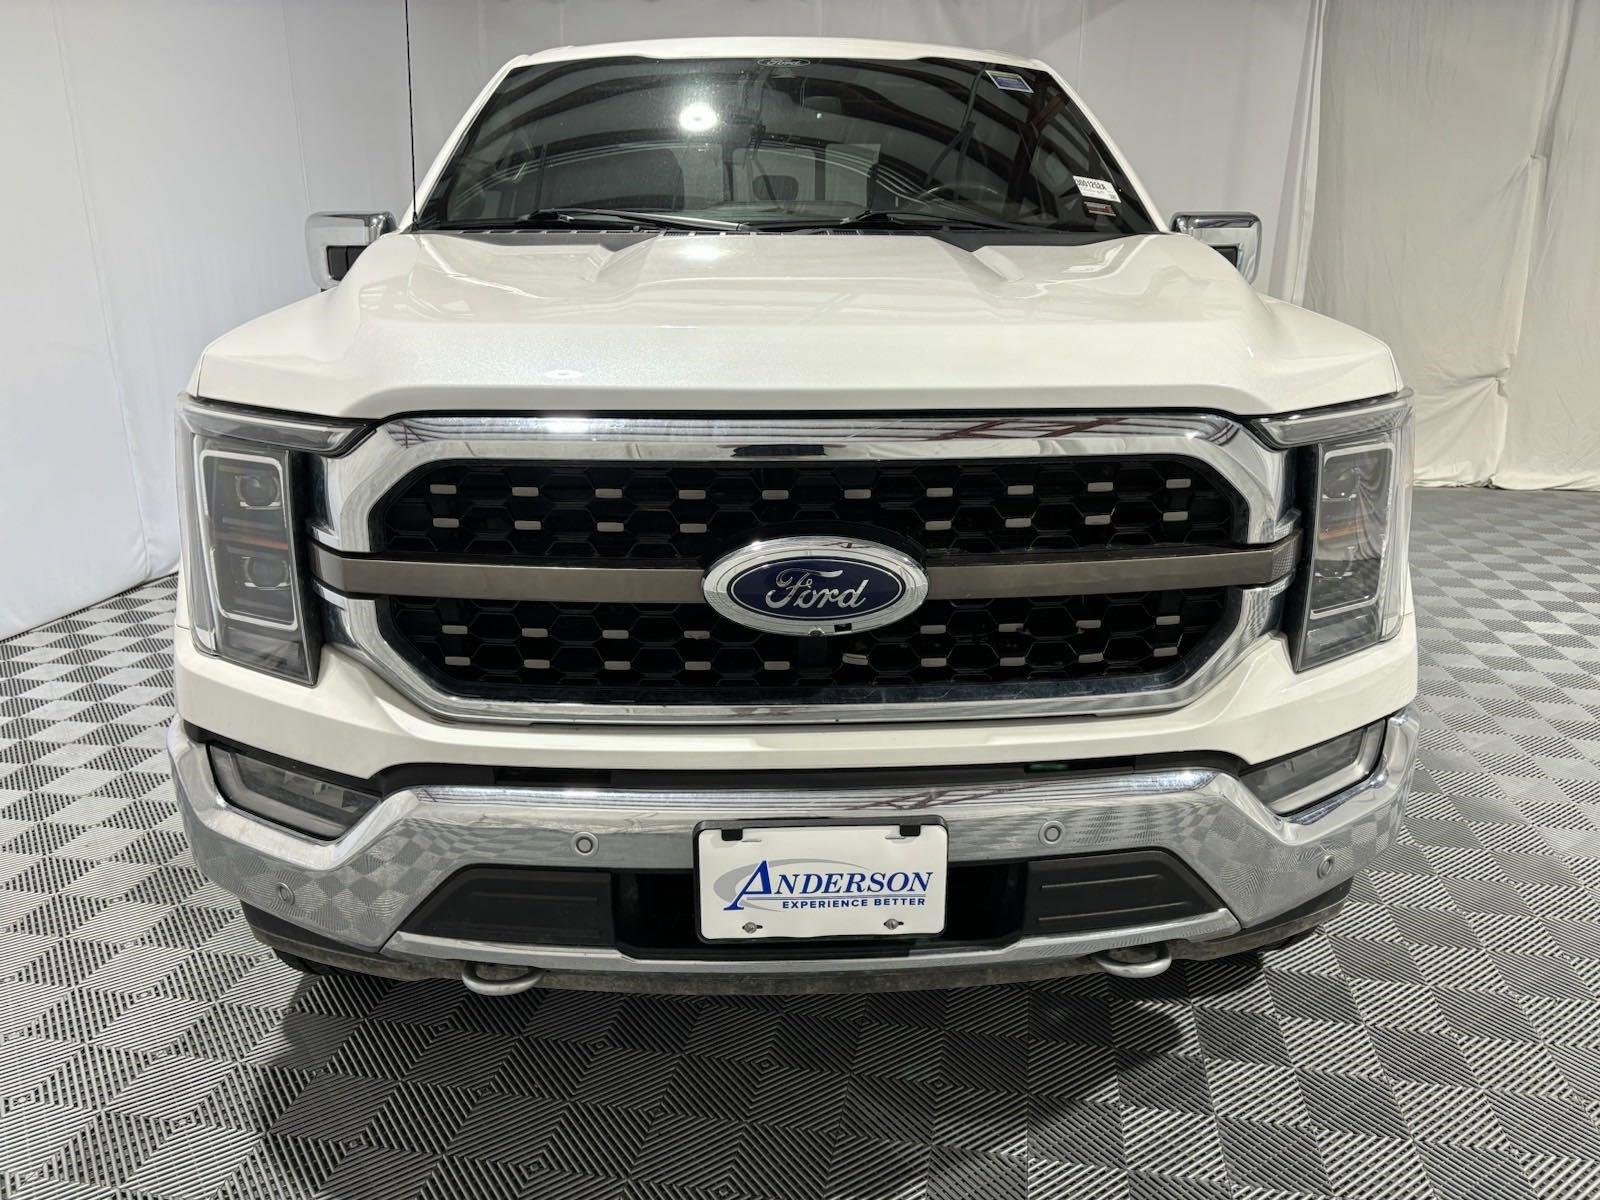 Used 2021 Ford F-150 King Ranch Crew Cab Truck for sale in St Joseph MO